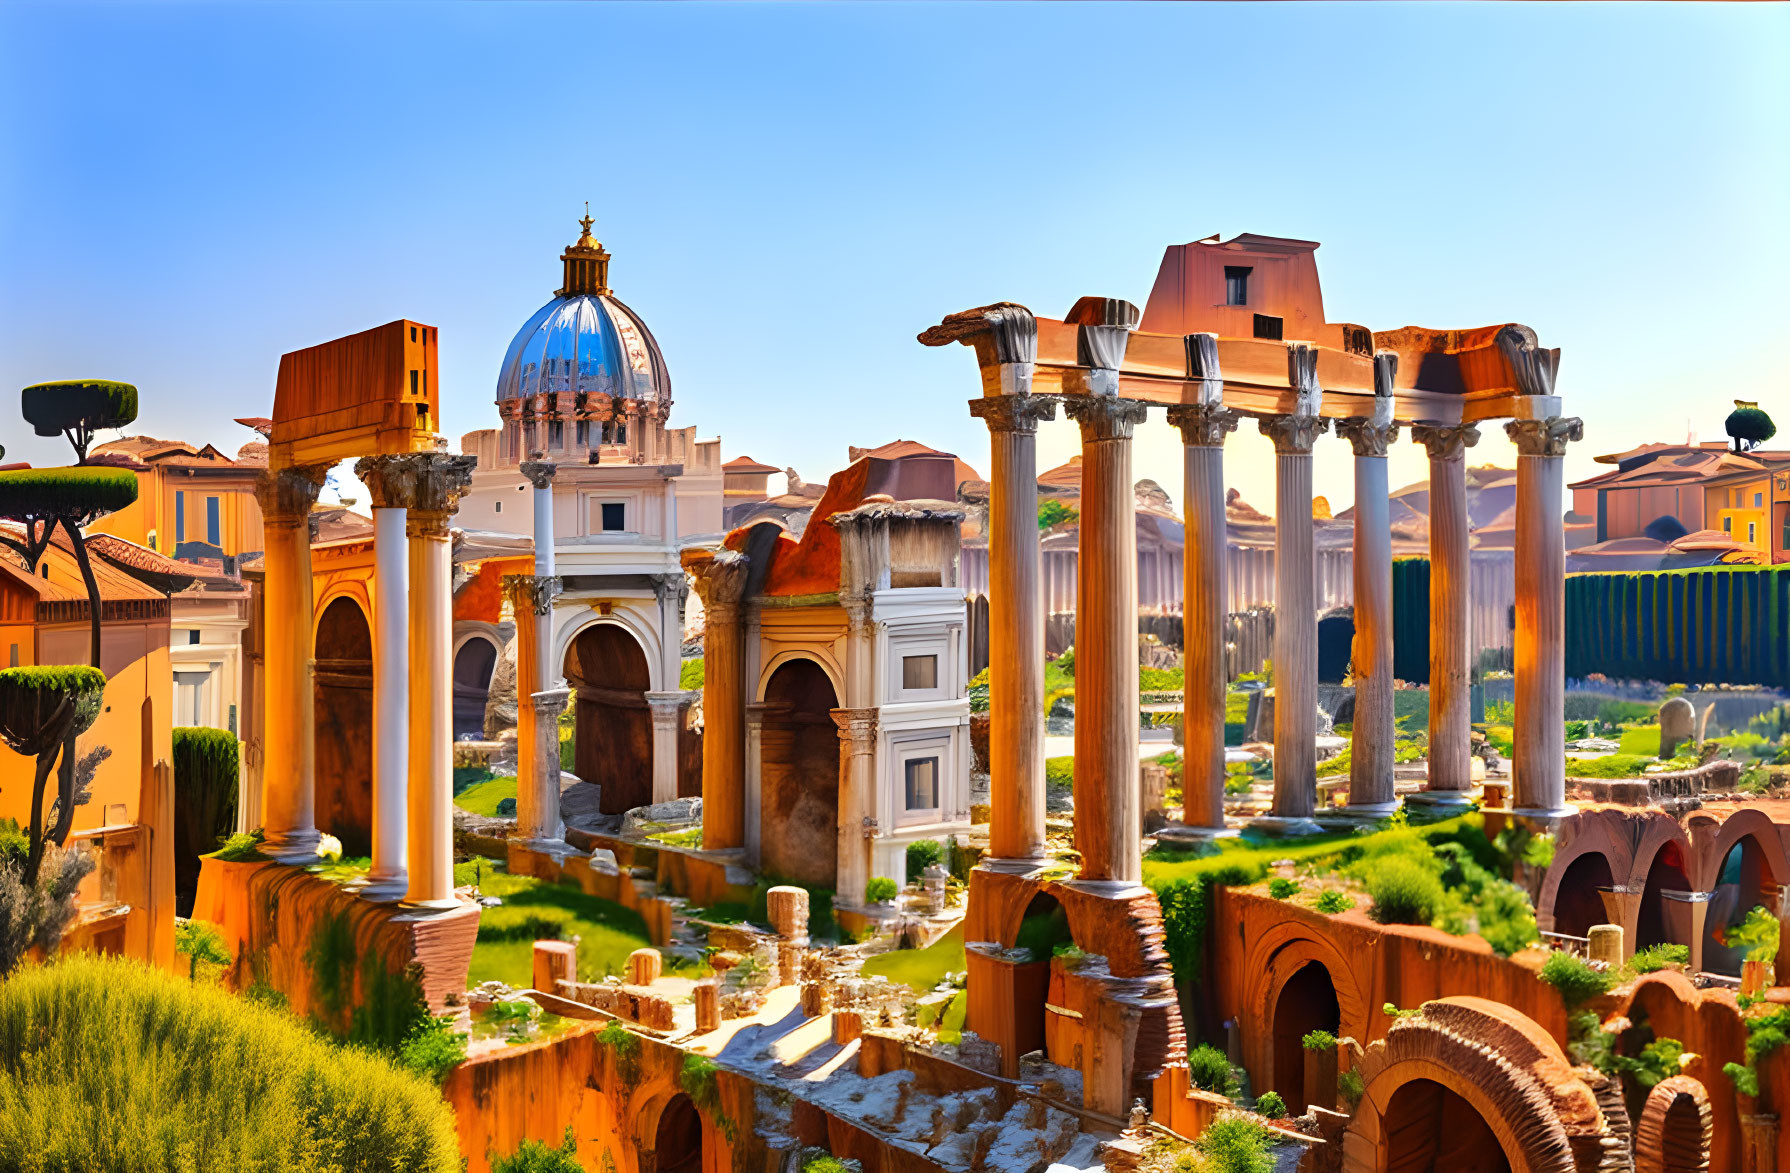 Ancient Roman ruins with columns and arches under blue sky and historical building dome.